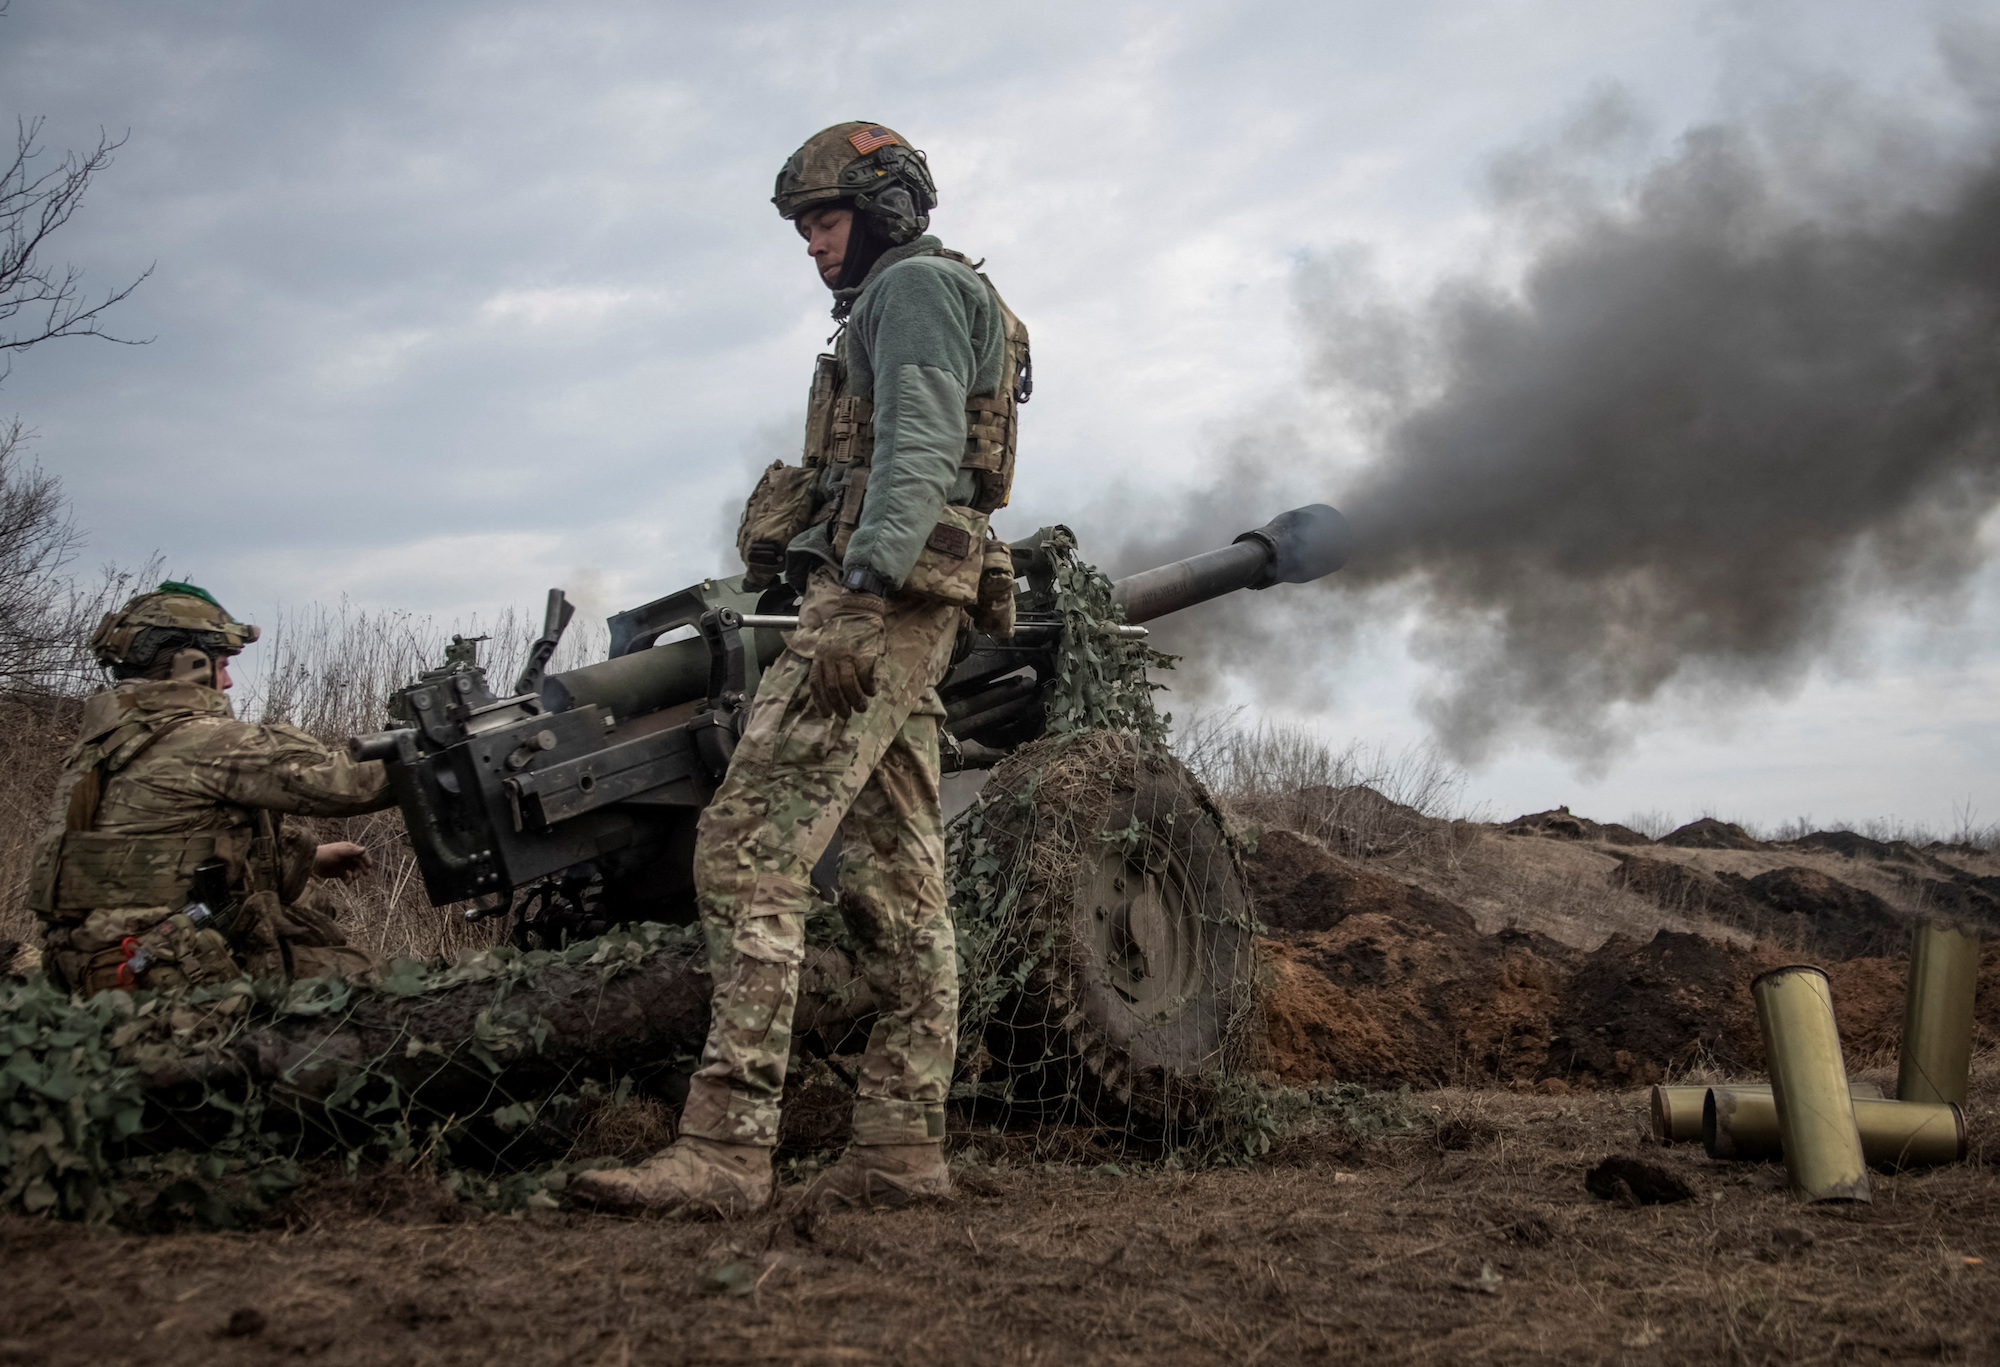 Ukrainian service members fire a howitzer M119 at a front line near the city of Bakhmut on March 10.